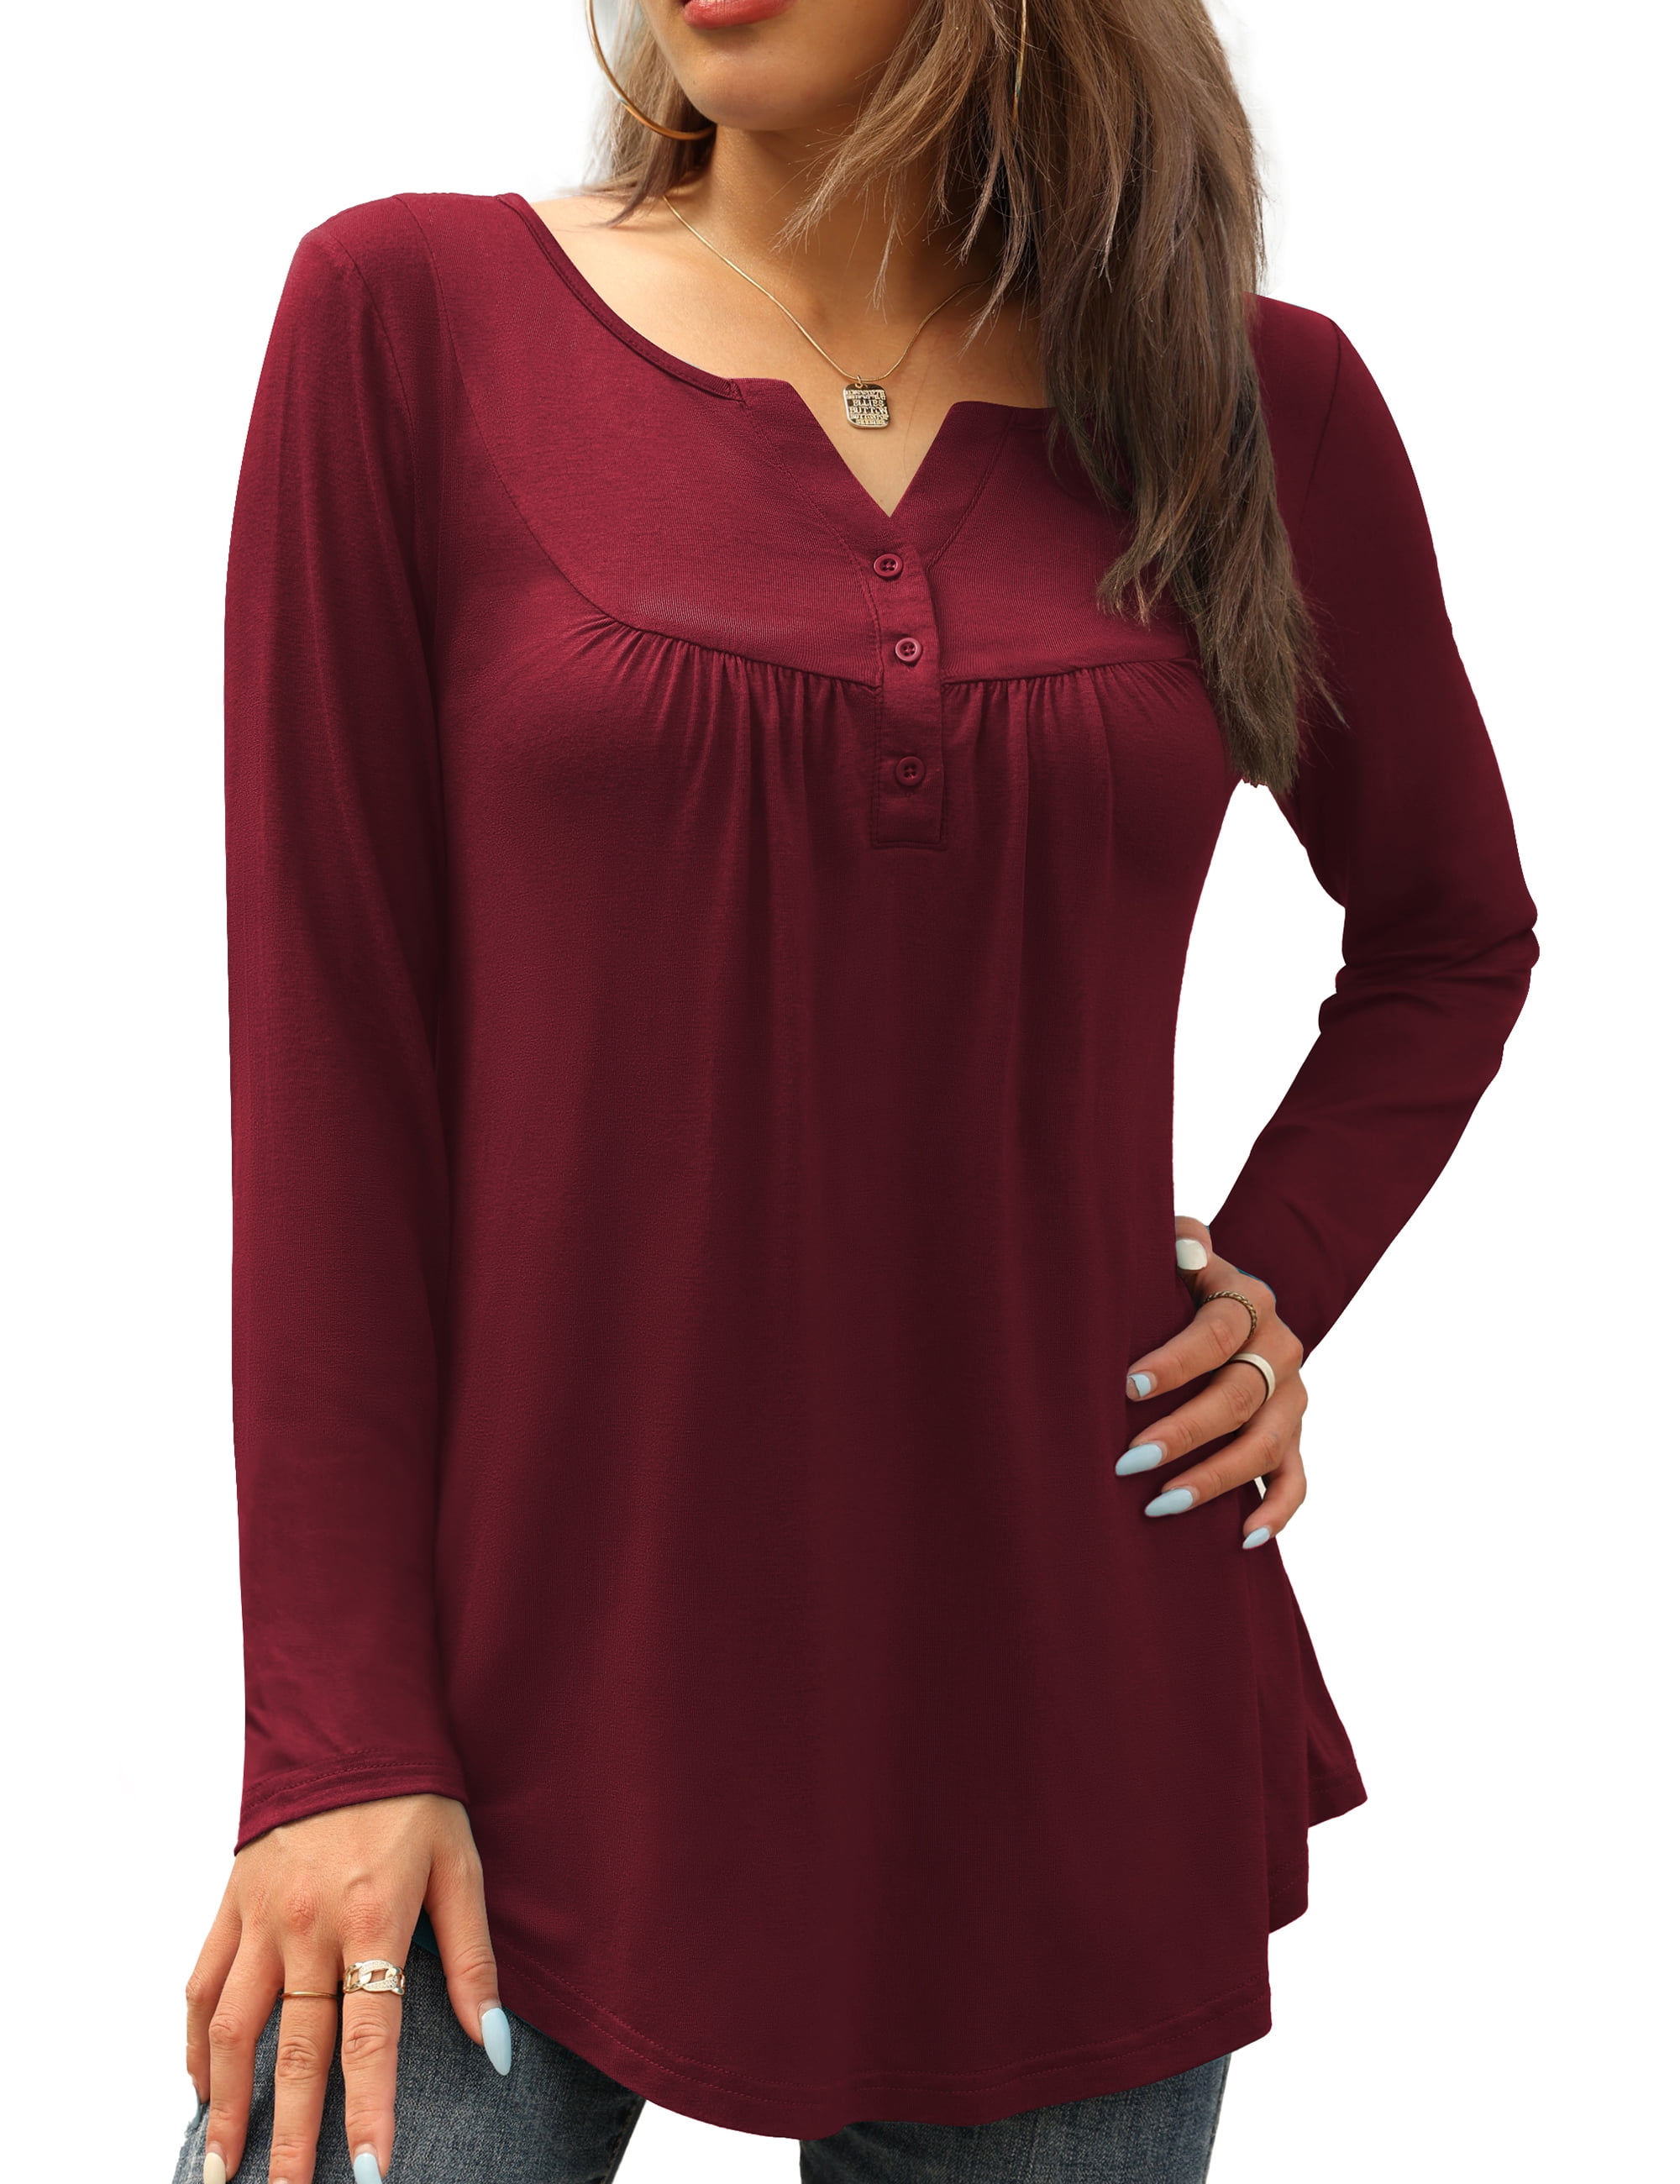 FOLUNSI Womens Plus Size Long Sleeve Tunic Tops Casual Floral Henley ...